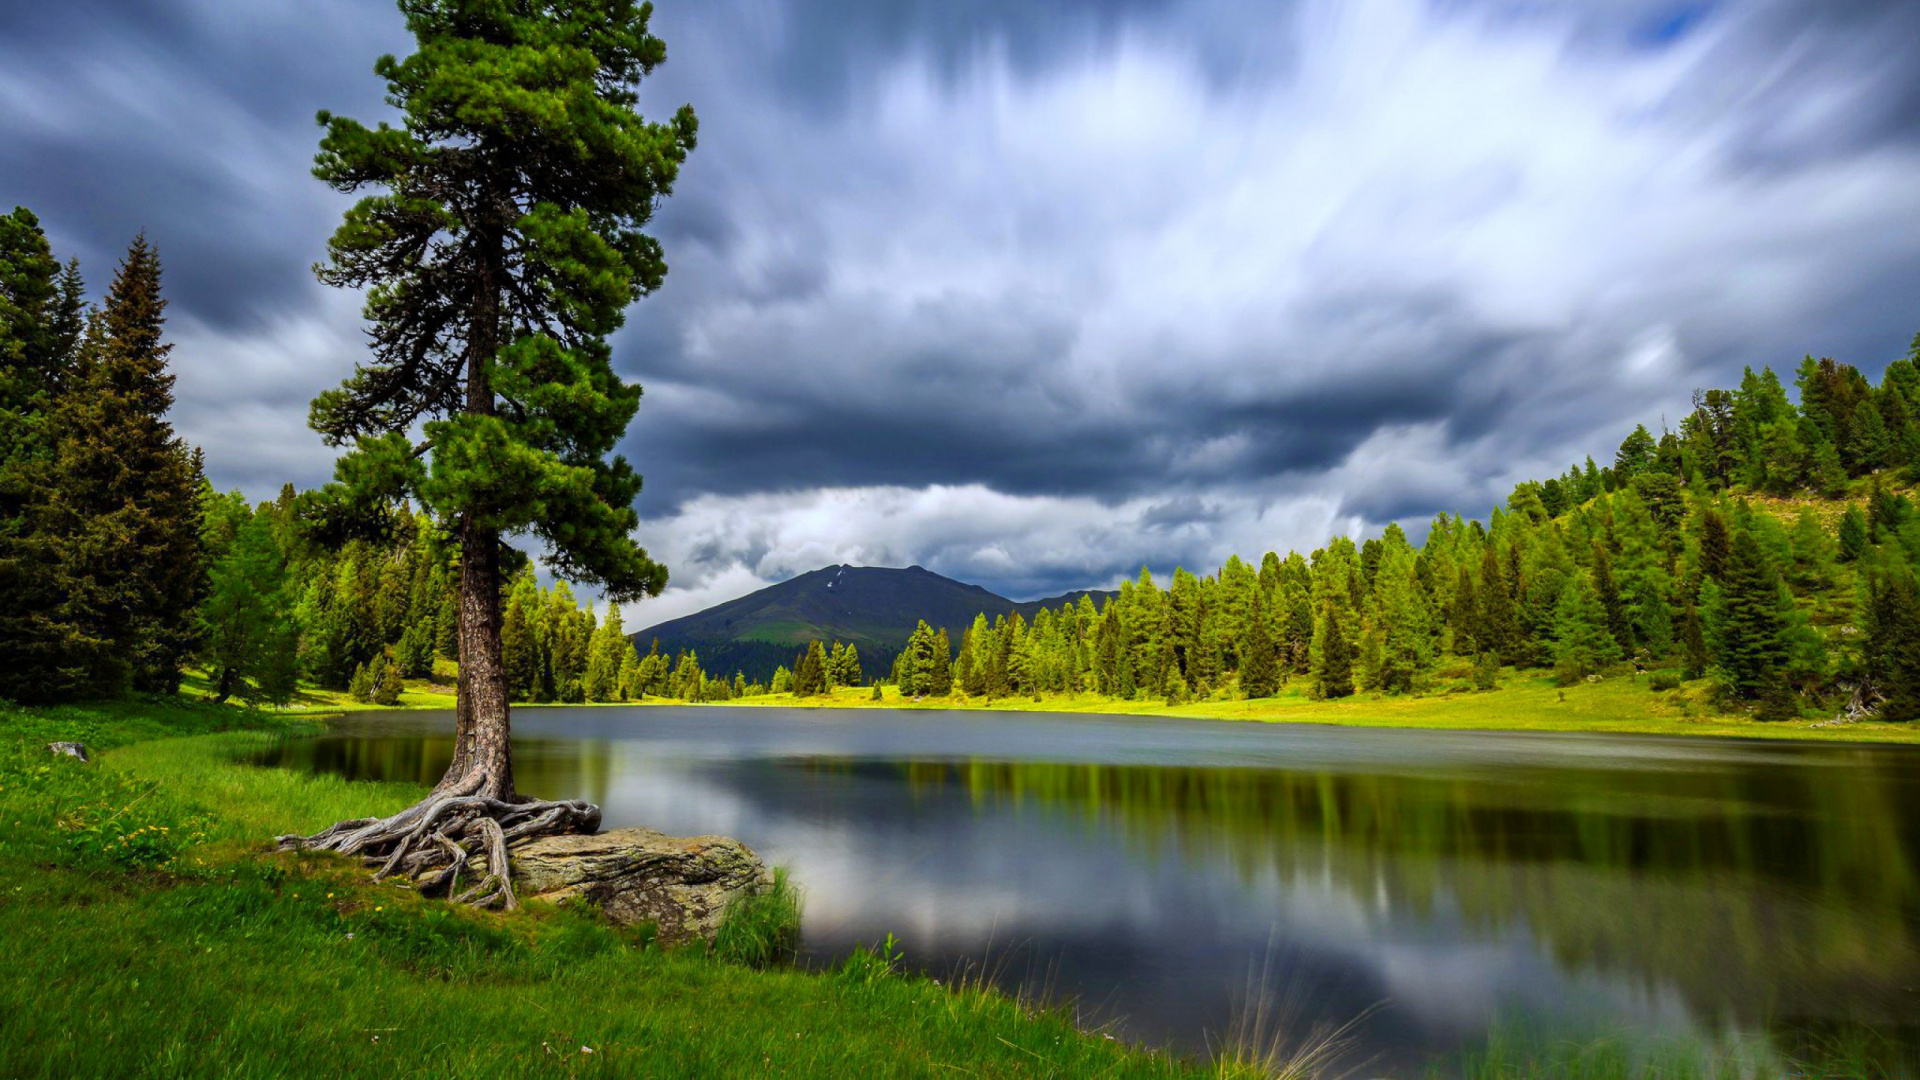 Green Tree Near Lake Under White Clouds and Blue Sky During Daytime. Wallpaper in 1920x1080 Resolution